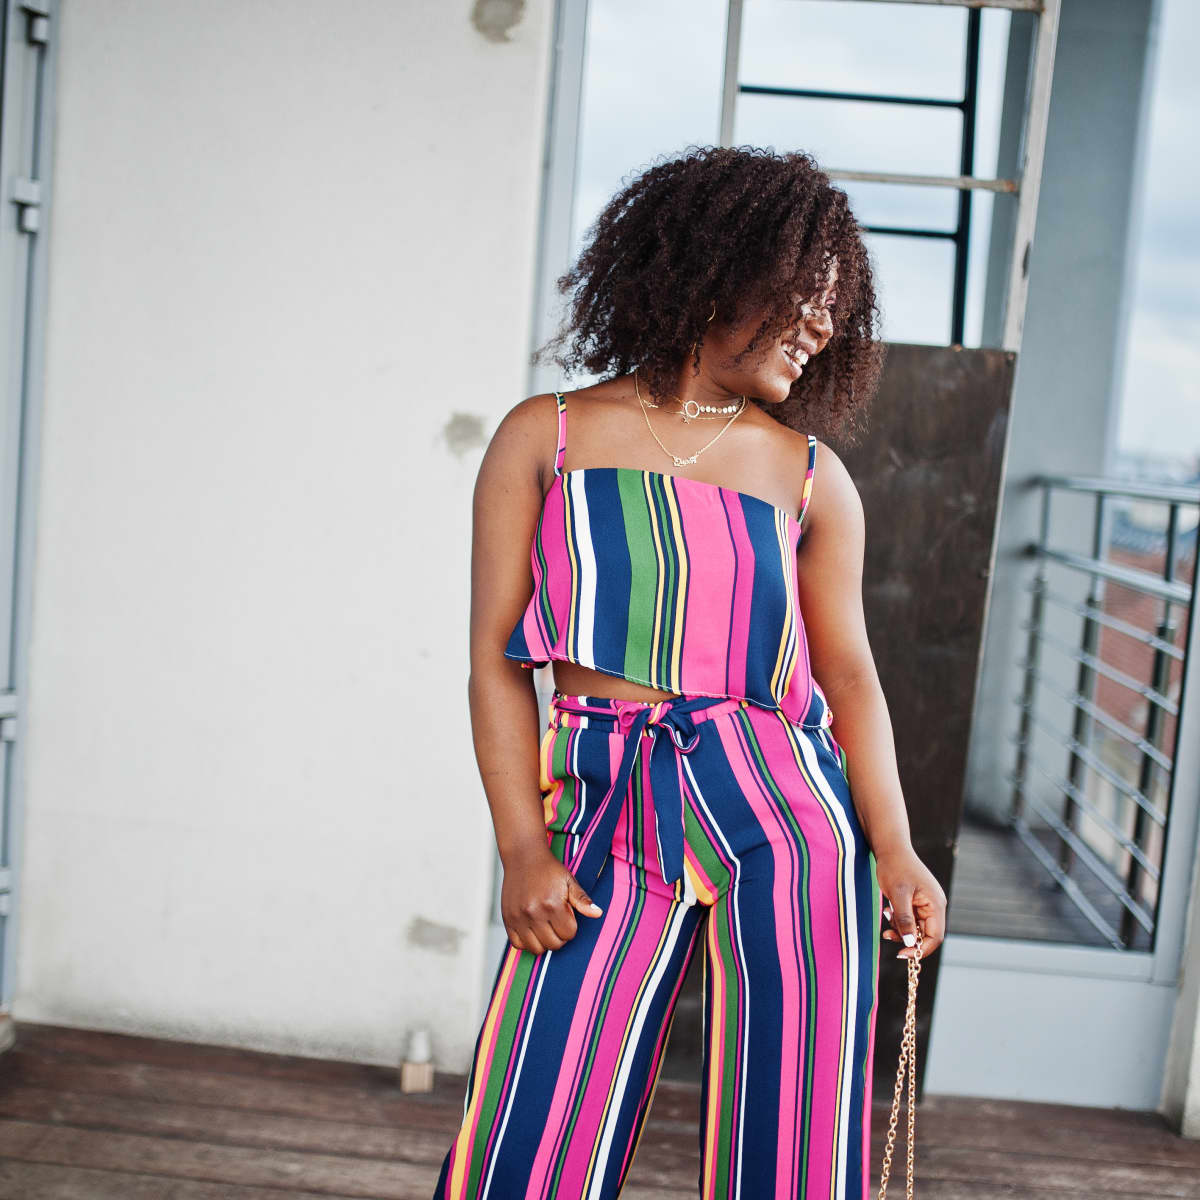 Upcycler Transformed Her Job's Uniform Into the Cutest Jumpsuit